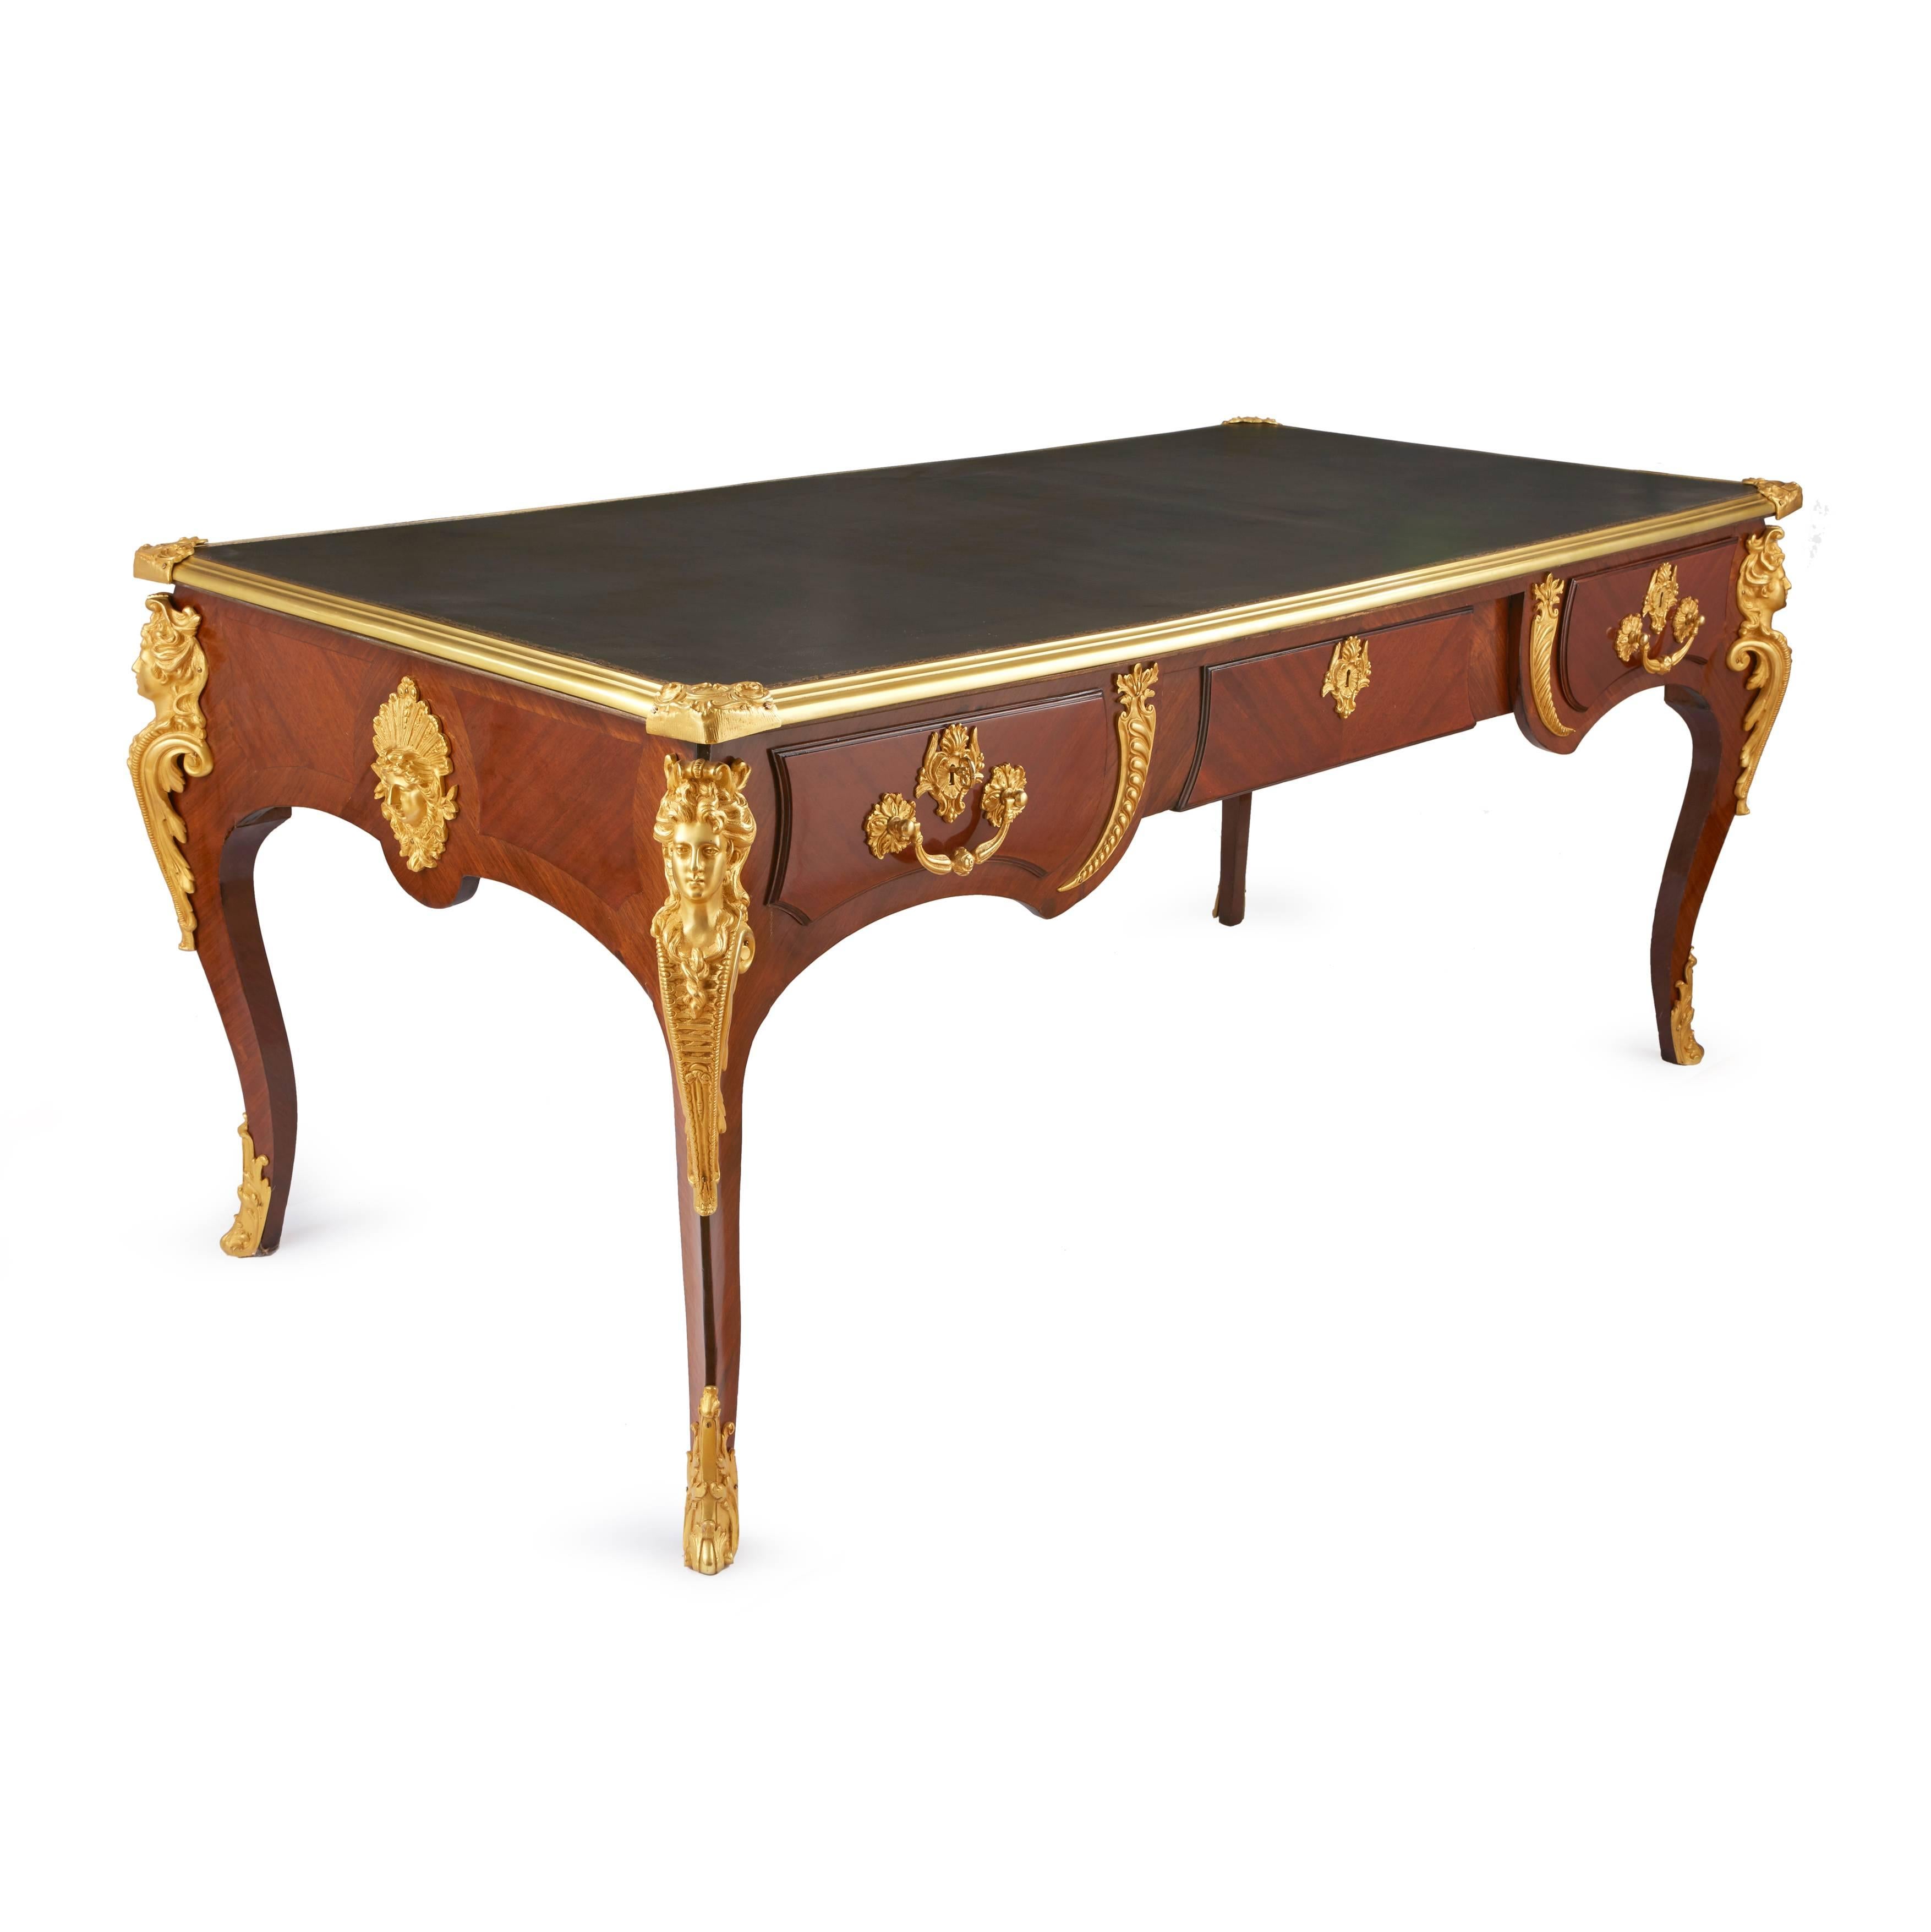 Of classical rectangular form, the four cabriole legs capped by ormolu female masks, with a further two masks to the sides, with three drawers and a leather writing surface 